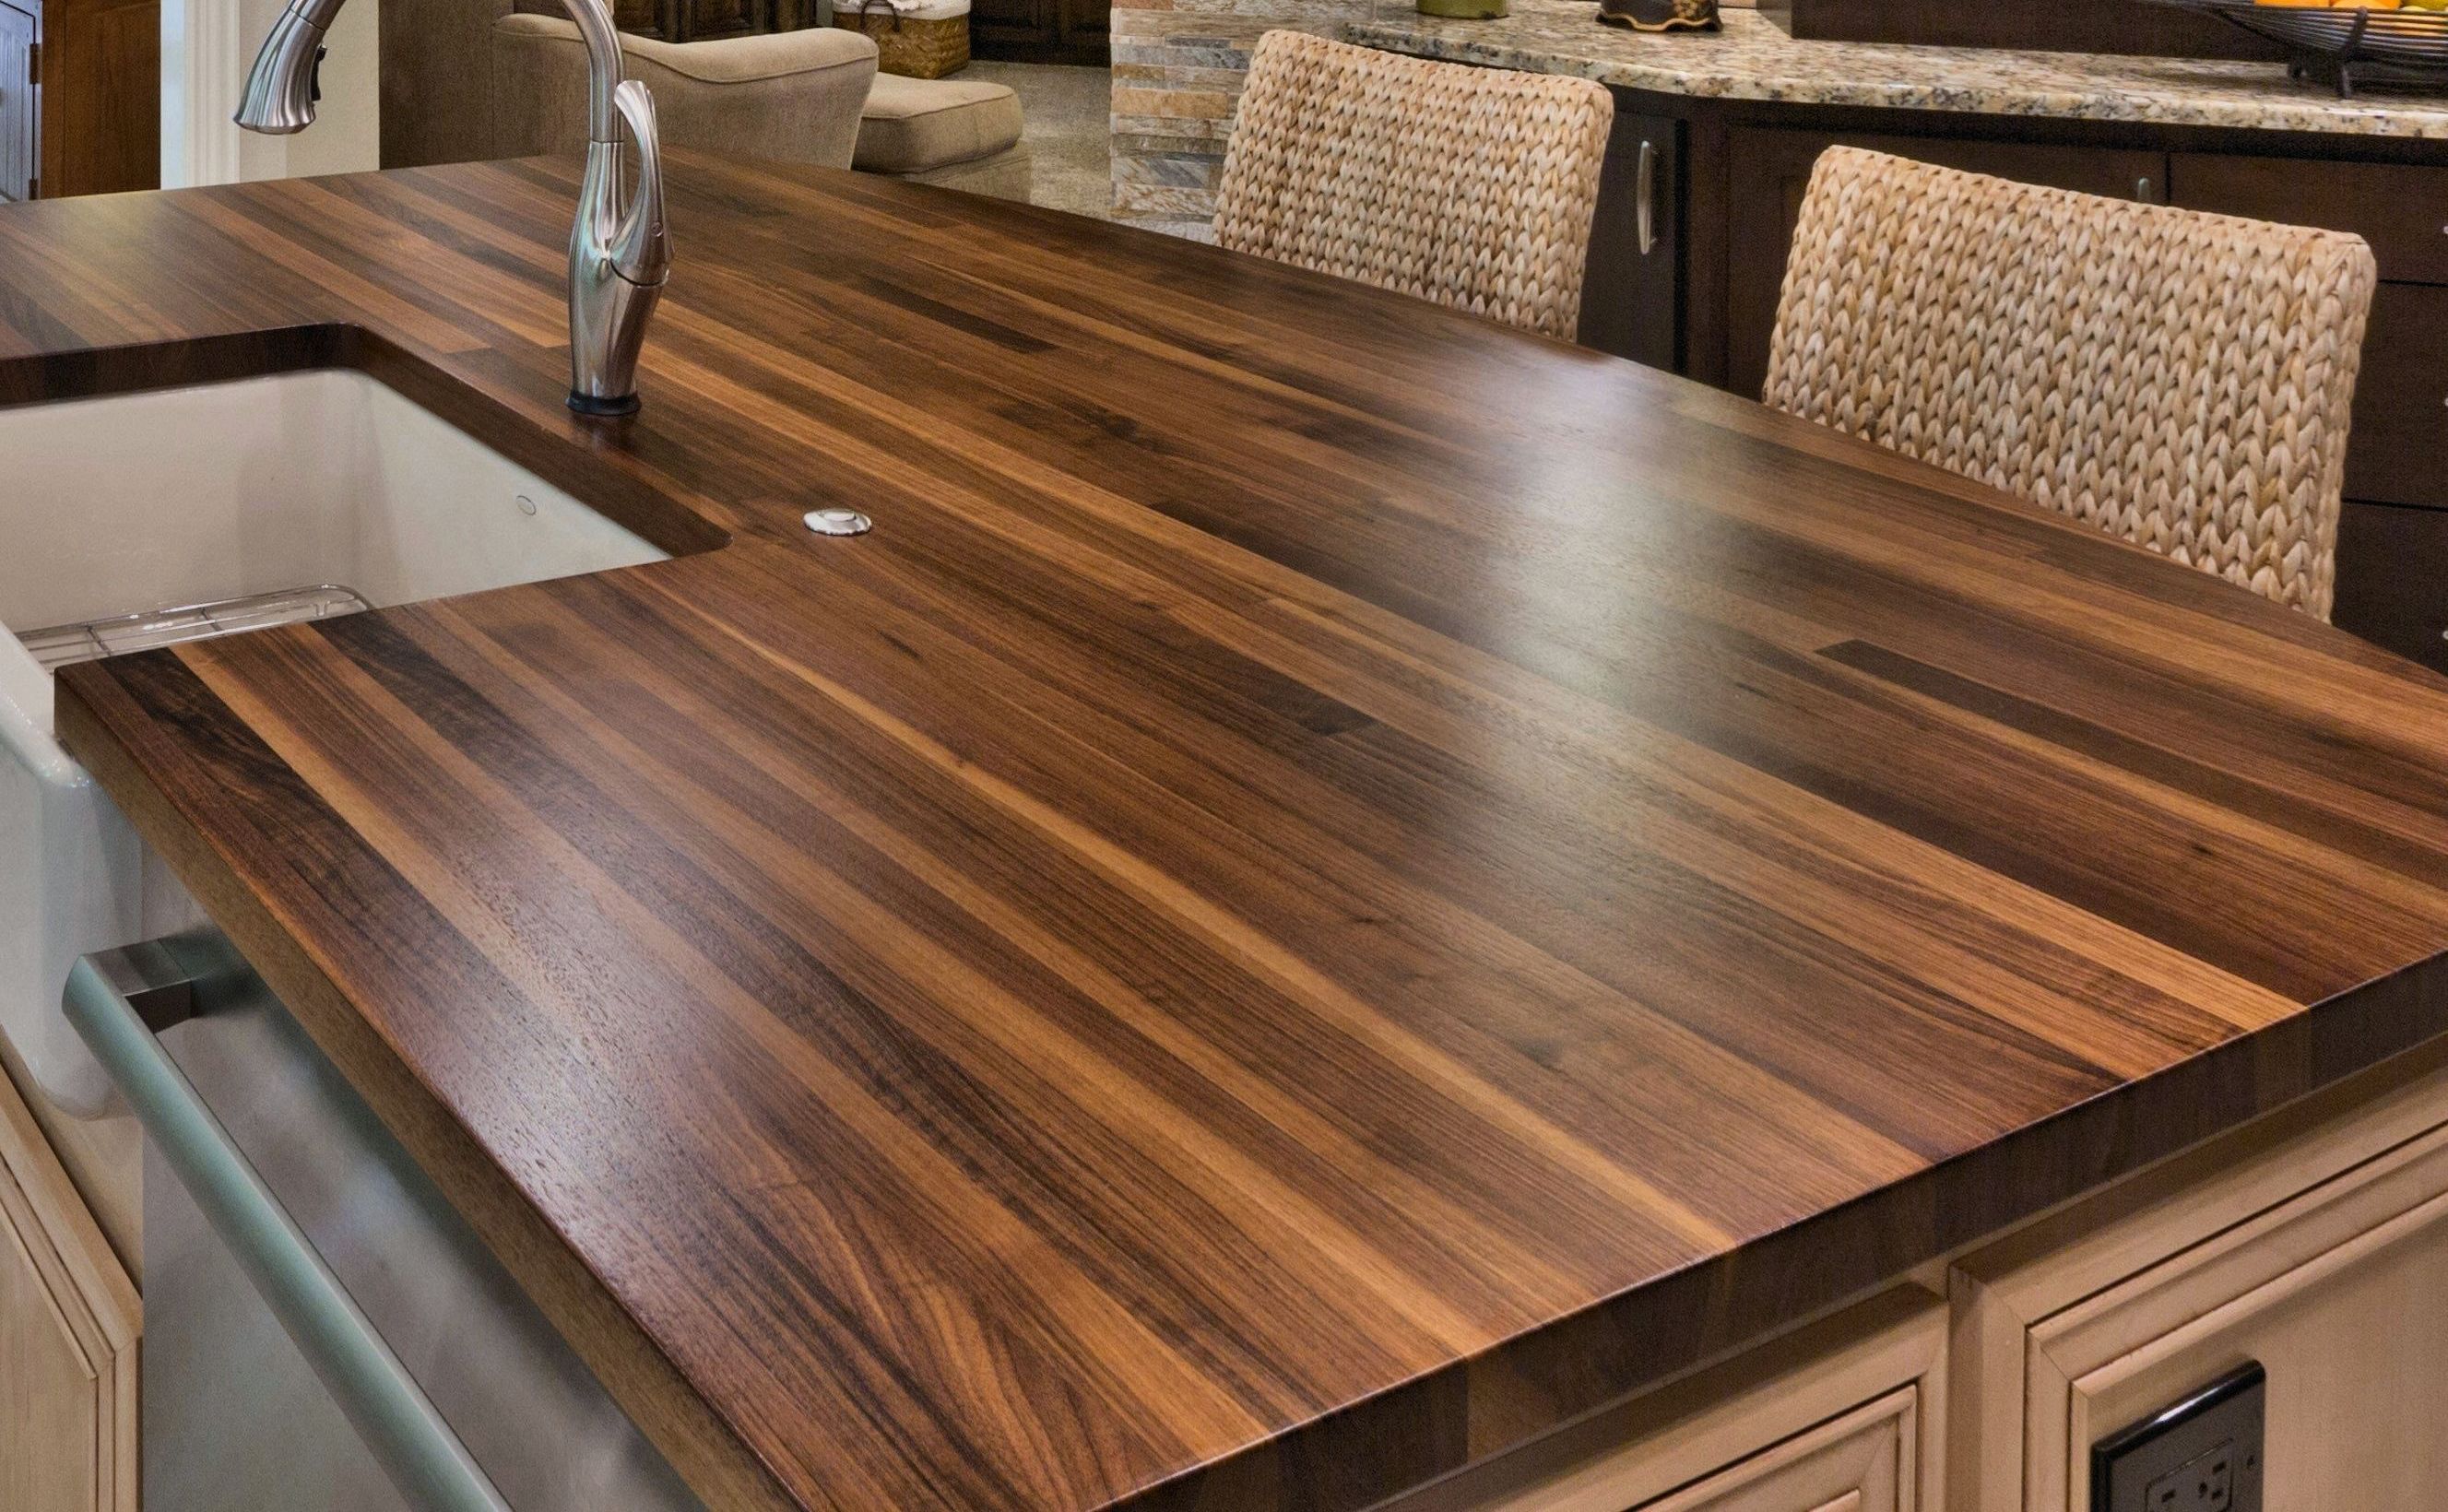 Construction Styles For Custom Wood Countertops